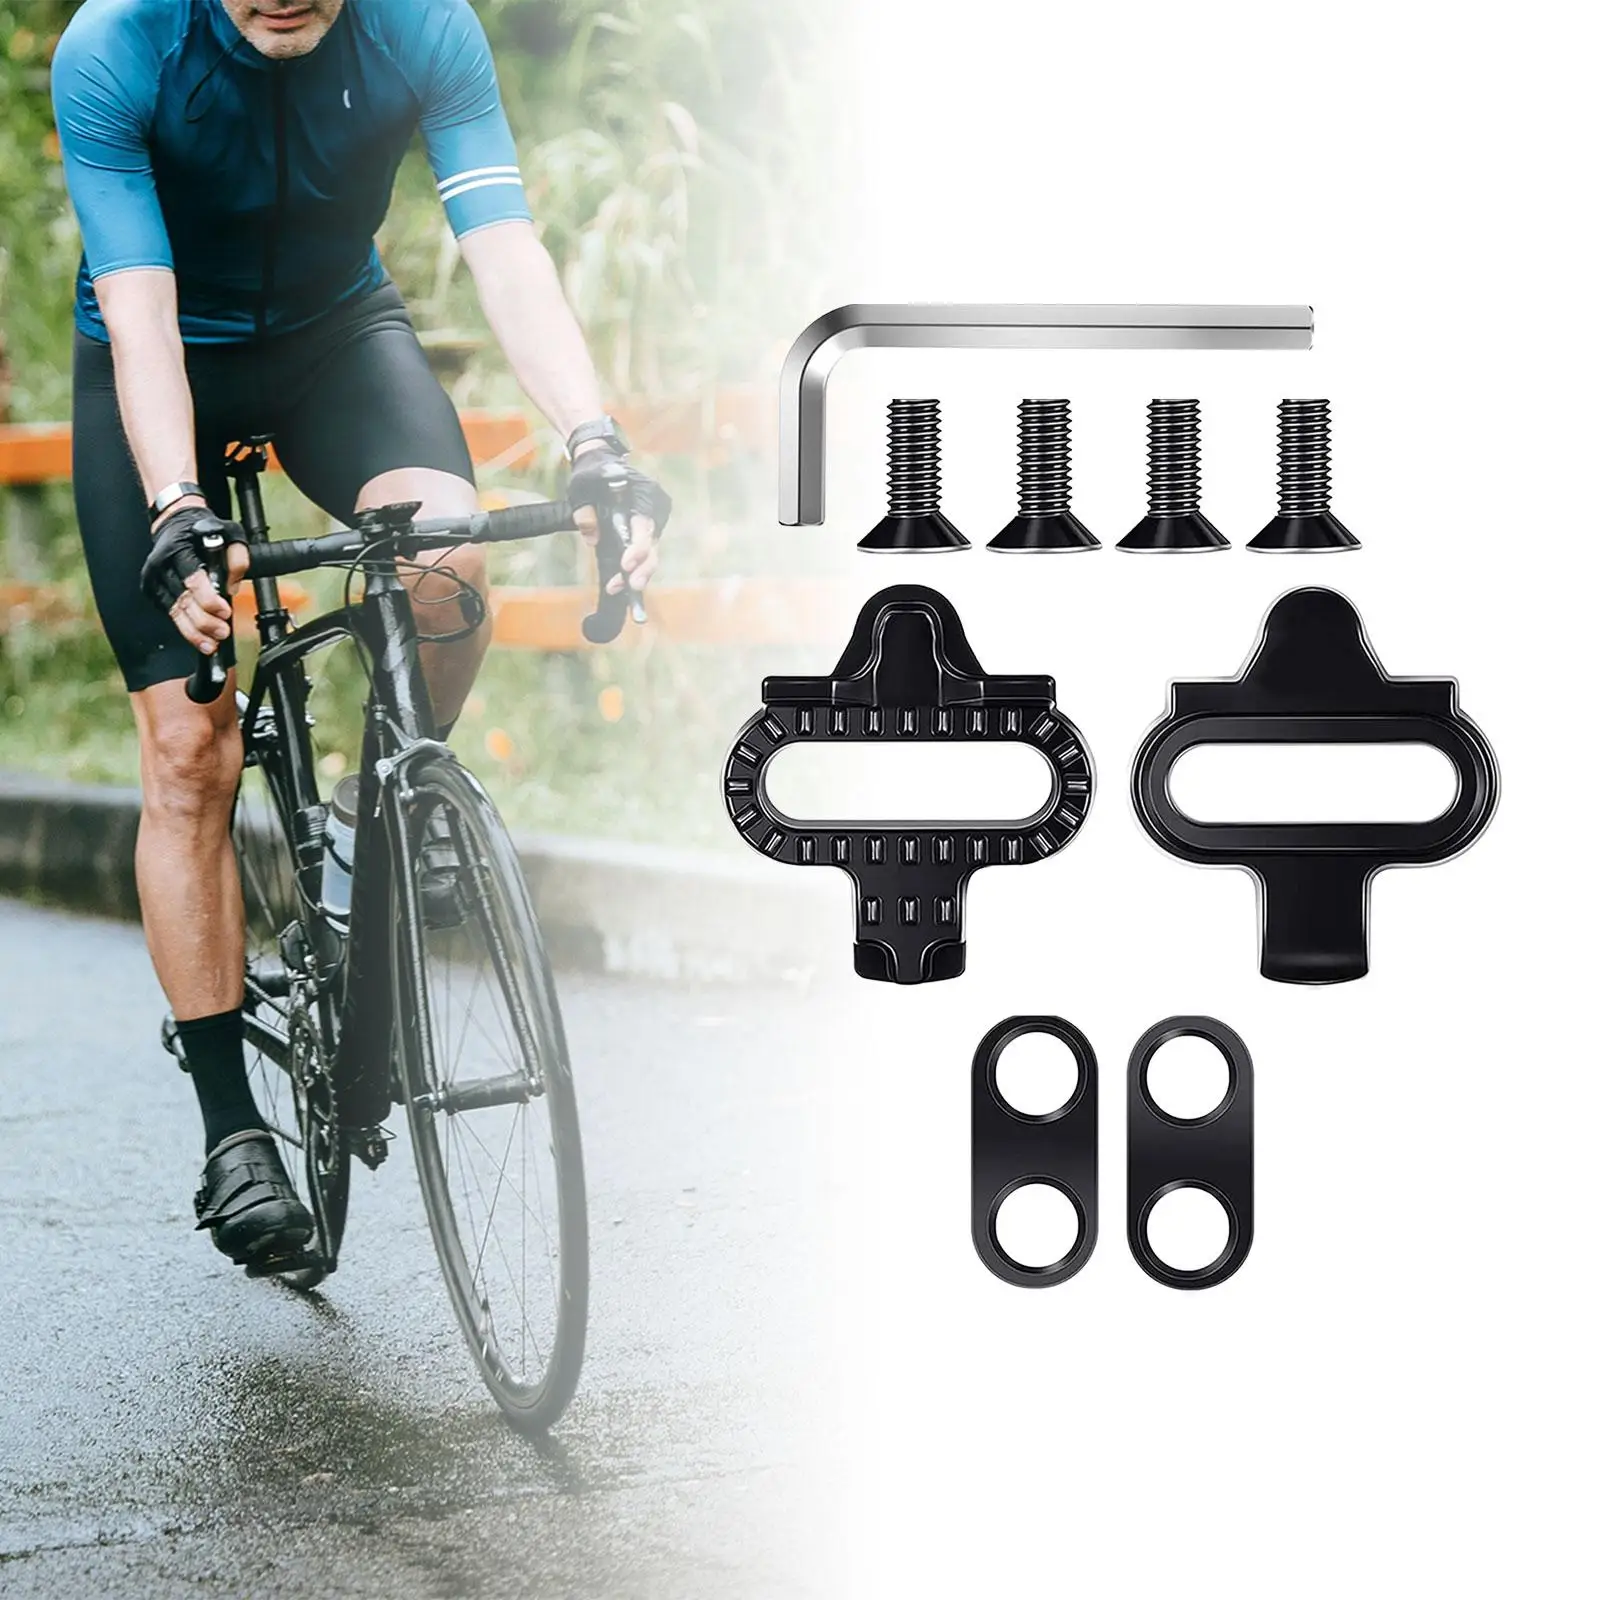 Bike Shoes Cleats Locking Protect Feet/ankles/Legs Easy Installation Mountain Bikes Cycling Accessories Bicycle Pedals Cleats